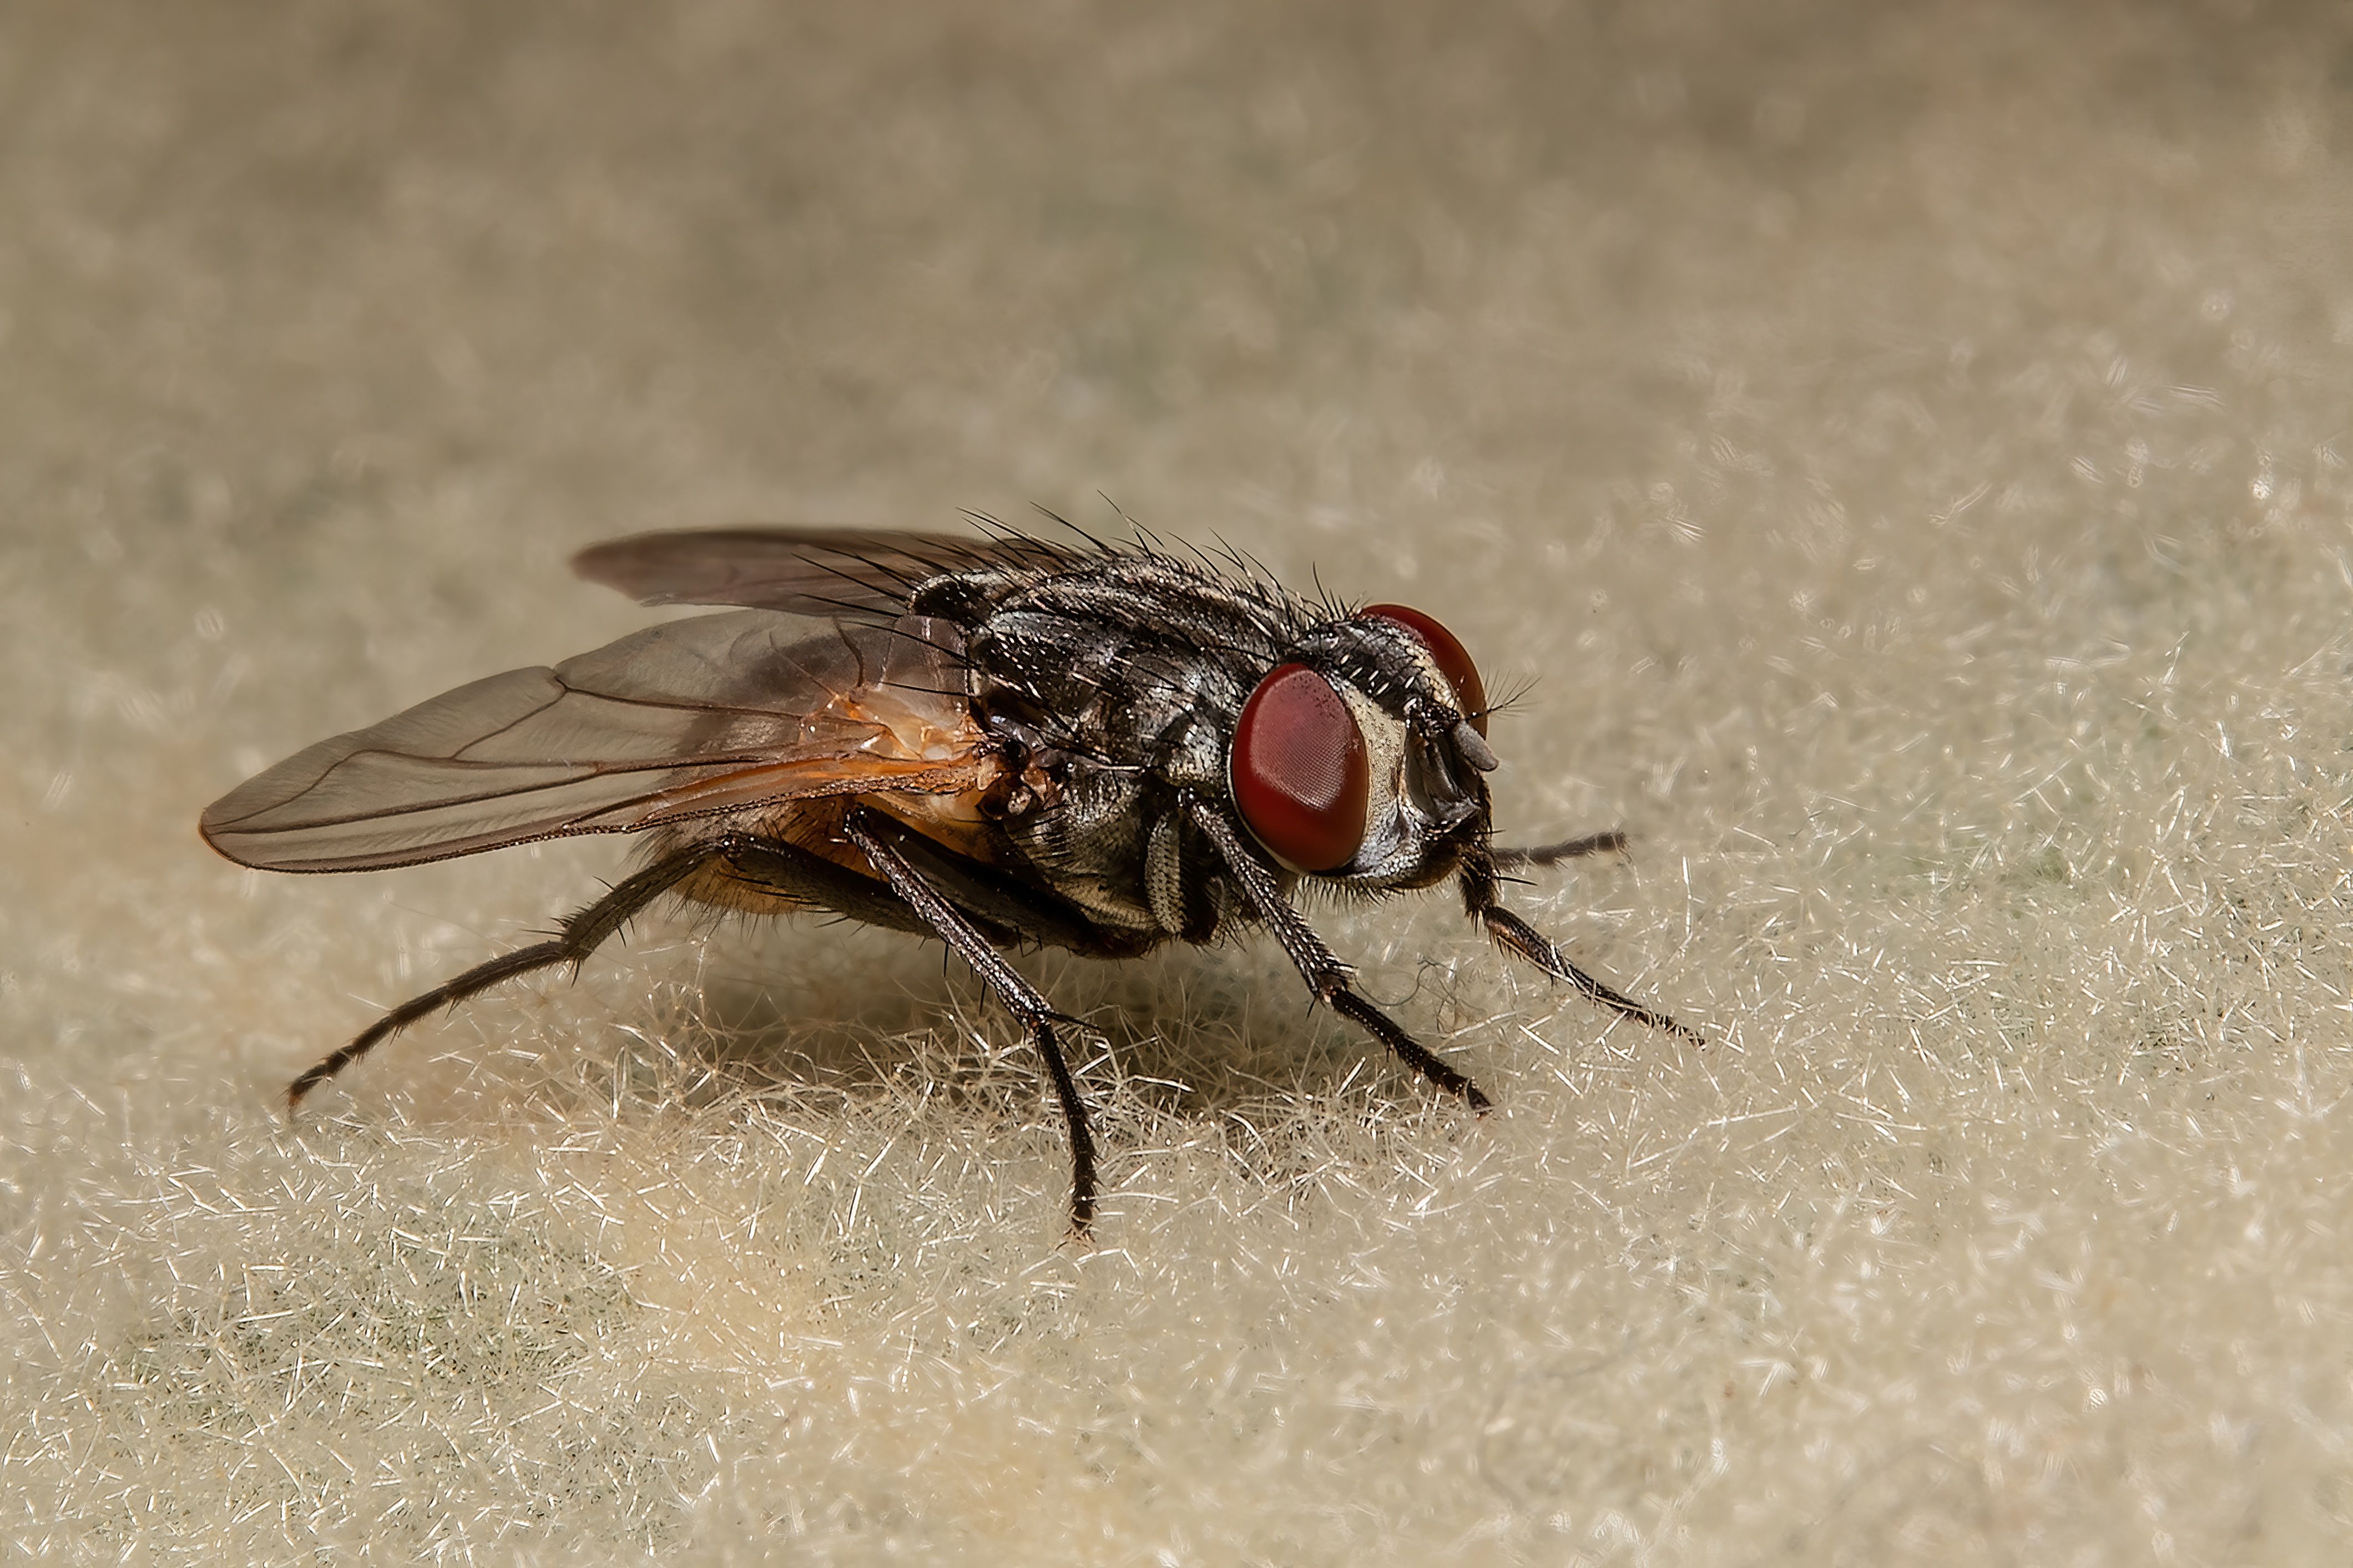 insect, insectphoto, insectmacro, macrophoto, nature, diptera, pest, fly, enthomology, Stephane